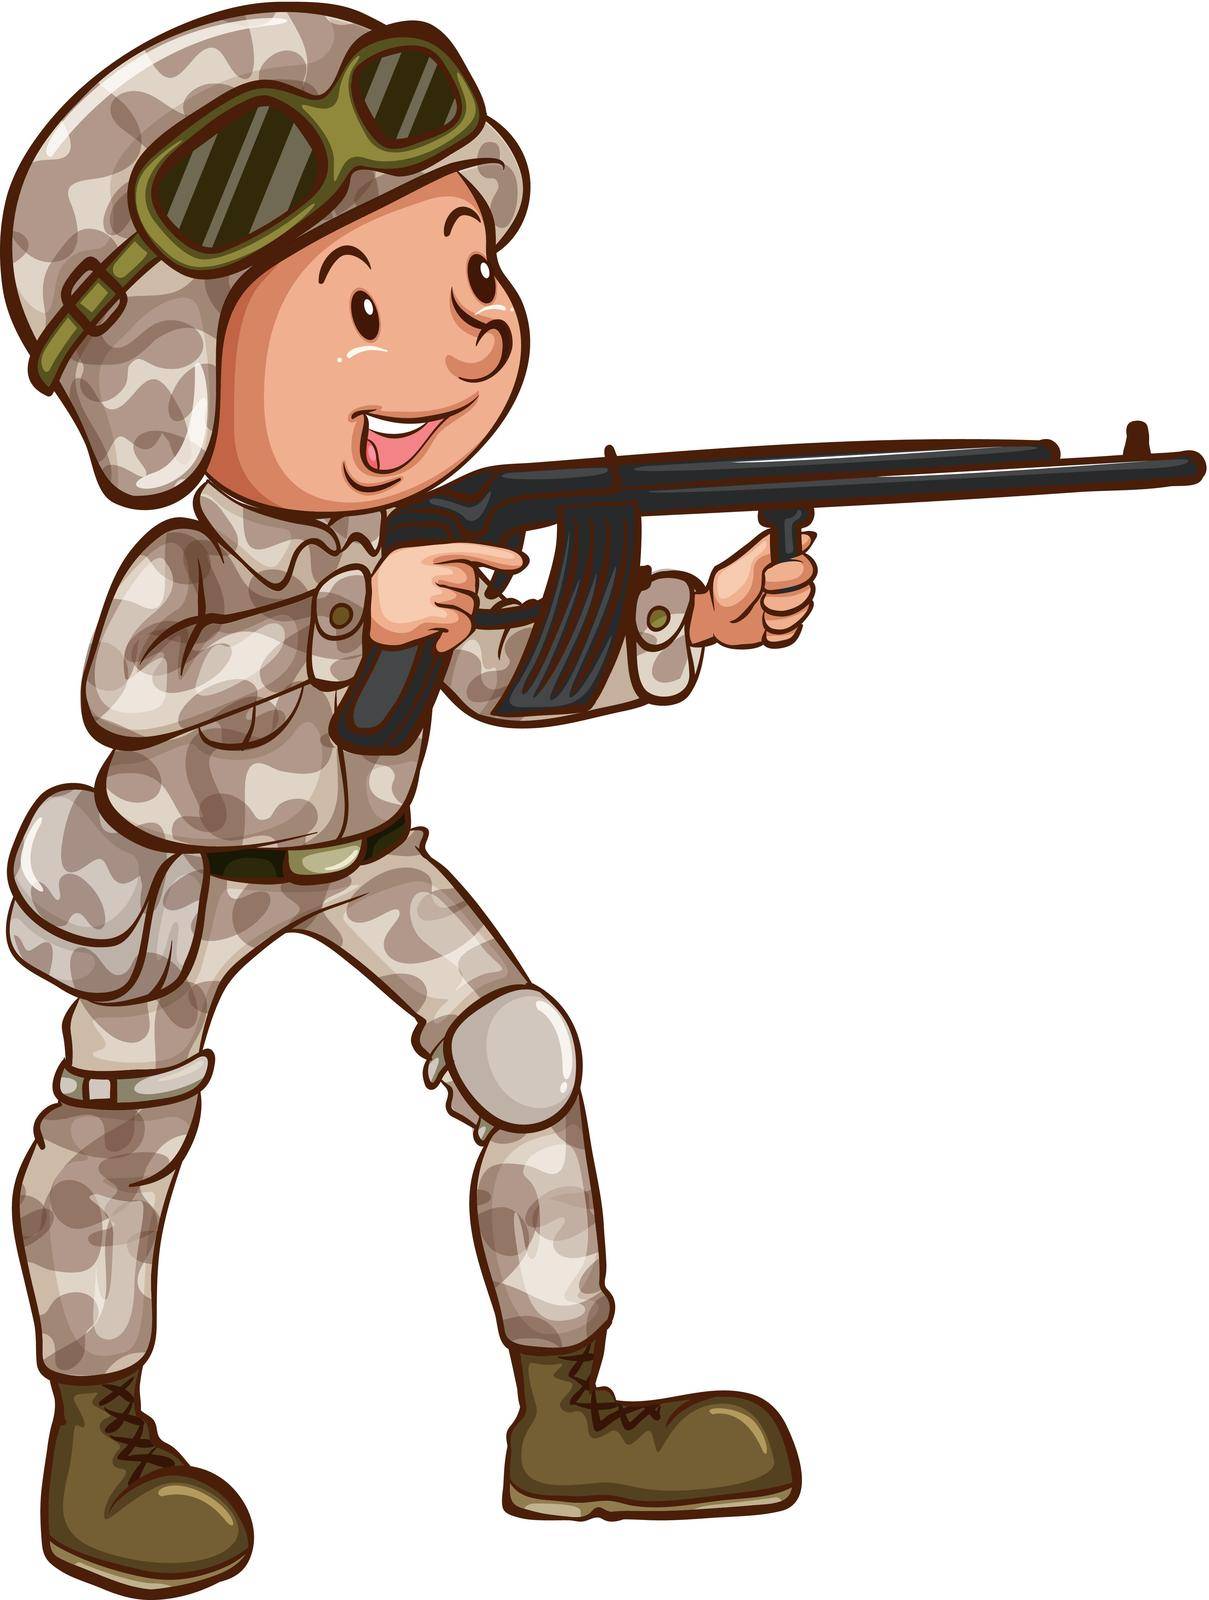 A simple drawing of a soldier by iimages